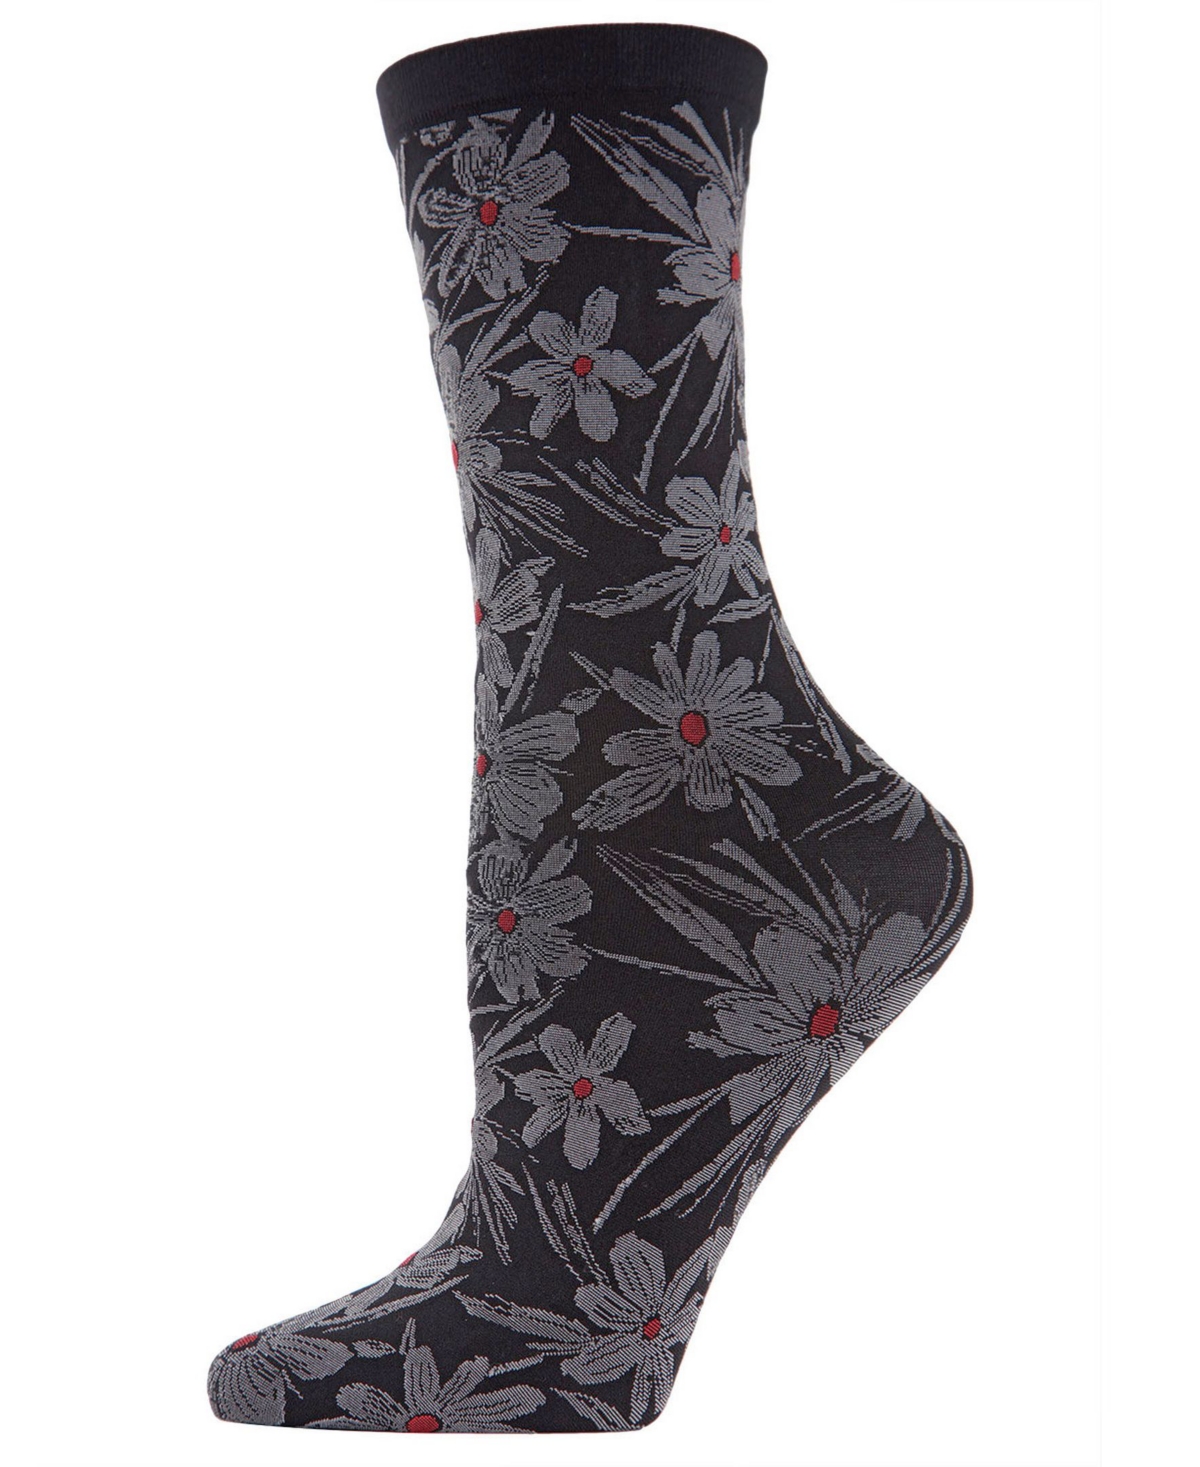 Women's Abstract Floral Crew Socks - Black